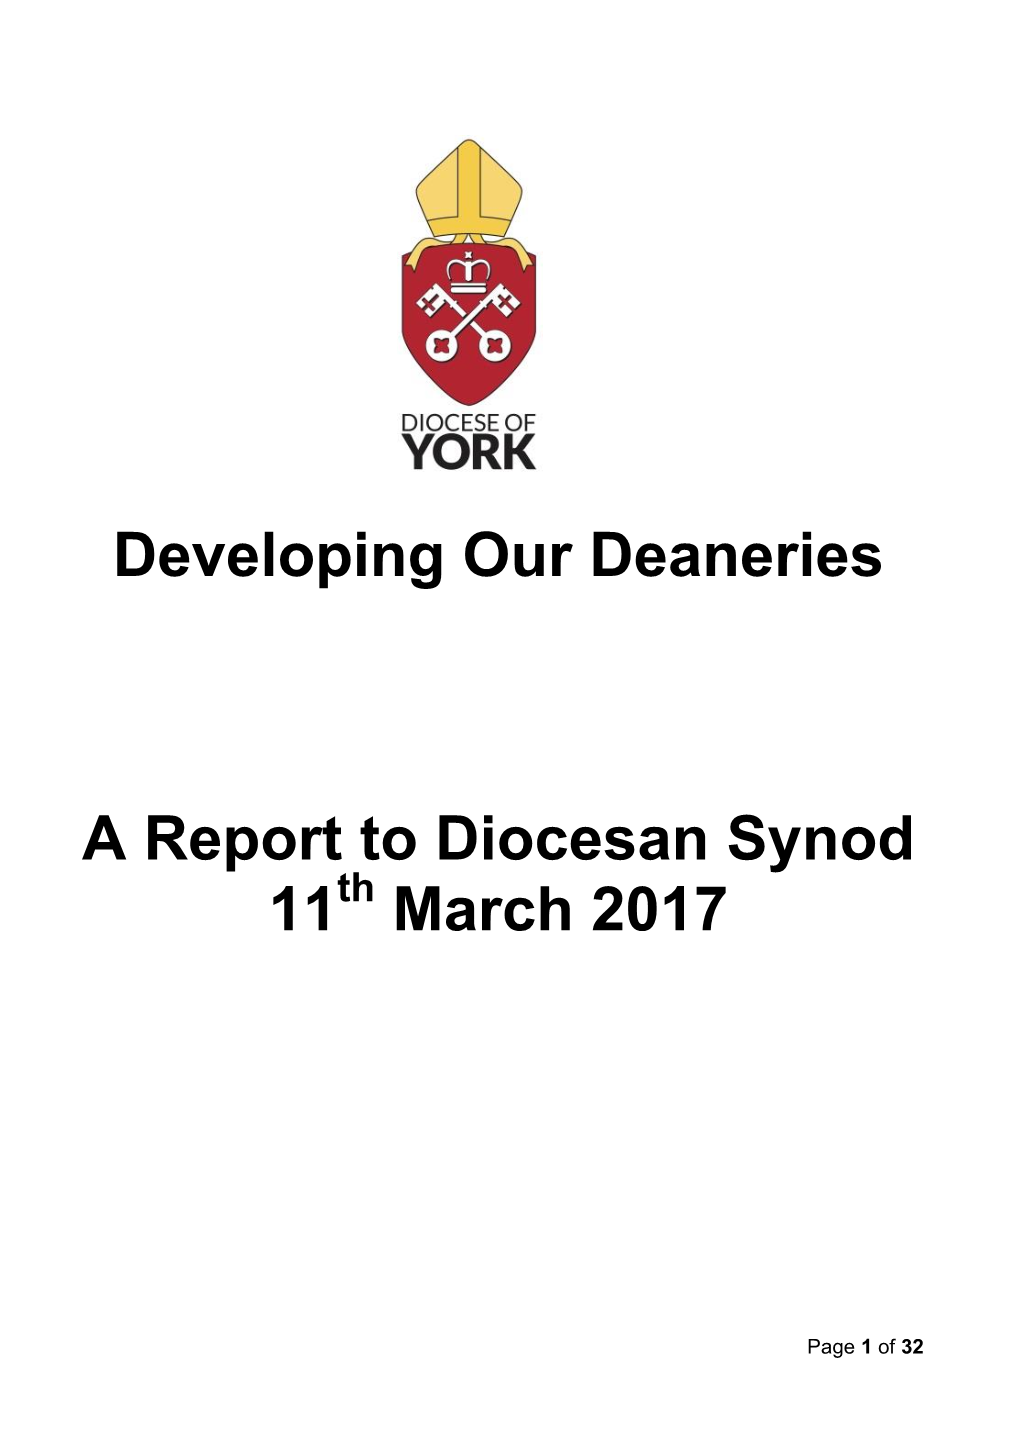 Developing Our Deaneries a Report to Diocesan Synod 11 March 2017